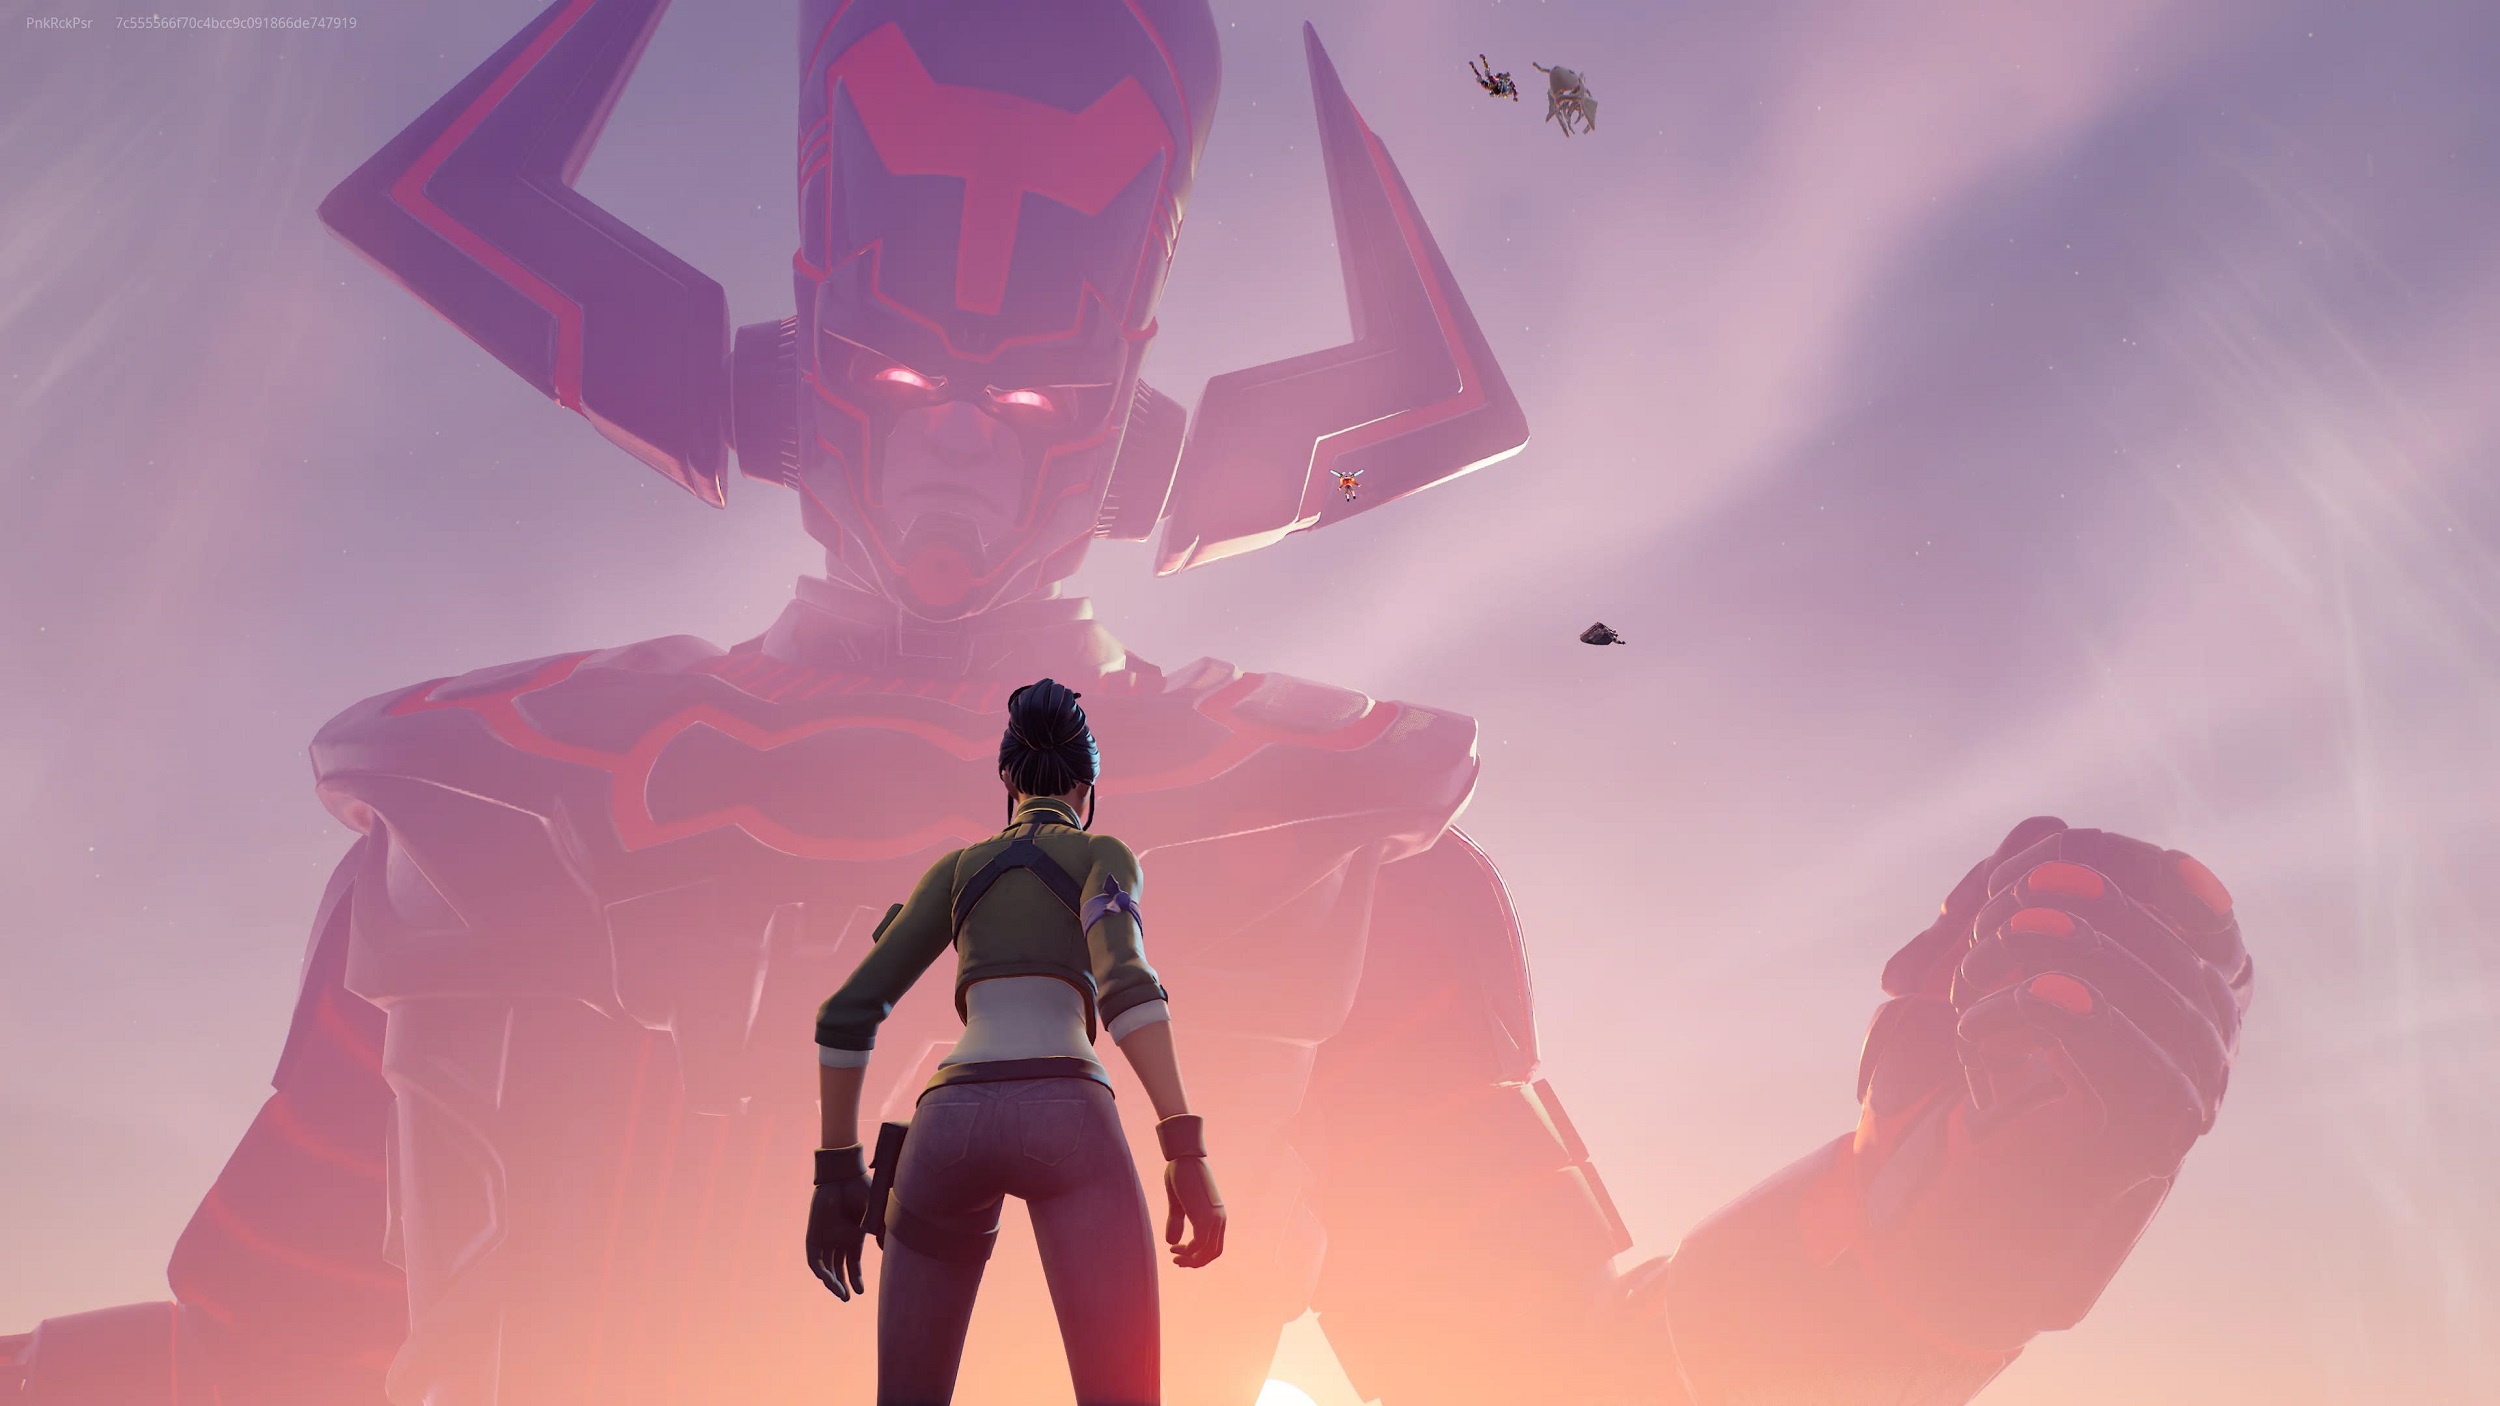 Whay Happened In Fortnite Today Fortnite Season 4 Galactus Event Takes Servers Down What Happened